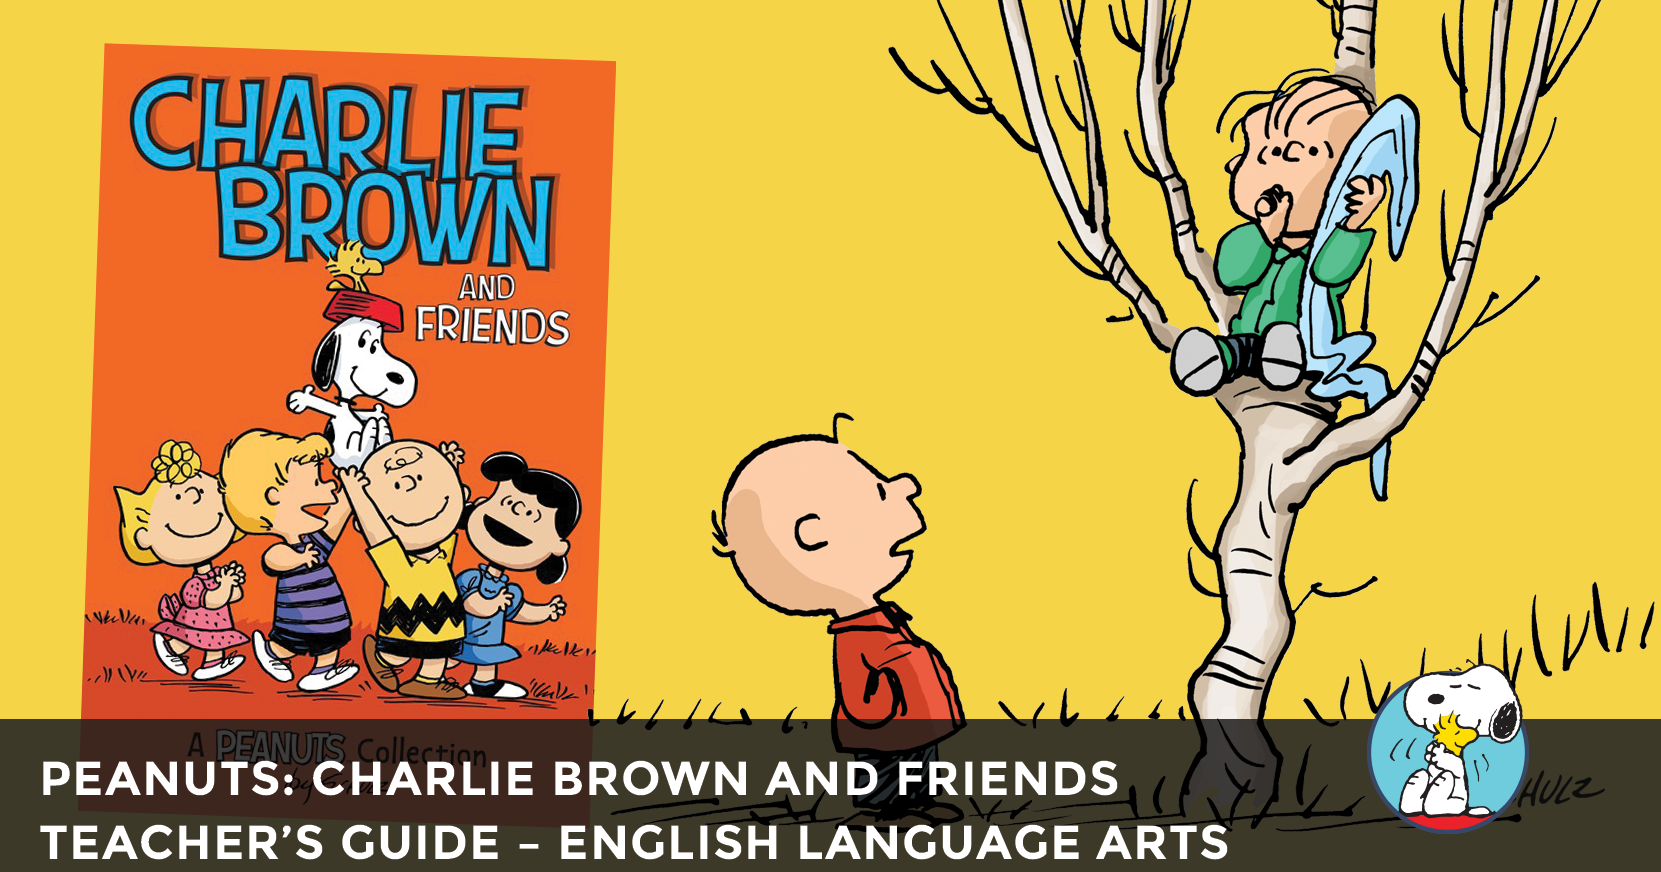 Charlie Brown and Friends Teaching Guide